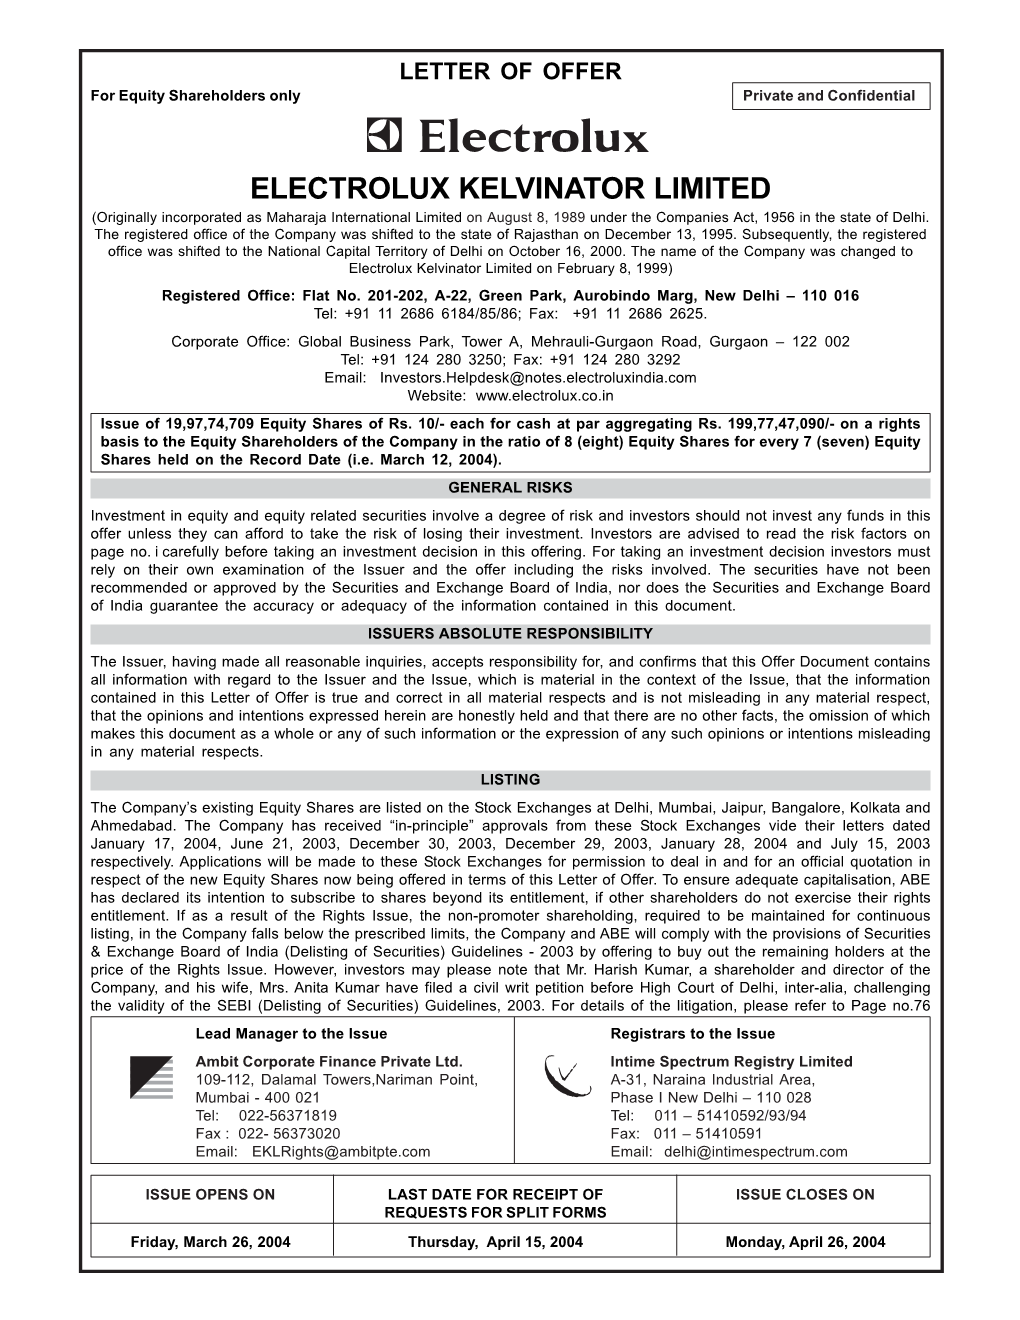 ELECTROLUX KELVINATOR LIMITED (Originally Incorporated As Maharaja International Limited on August 8, 1989 Under the Companies Act, 1956 in the State of Delhi